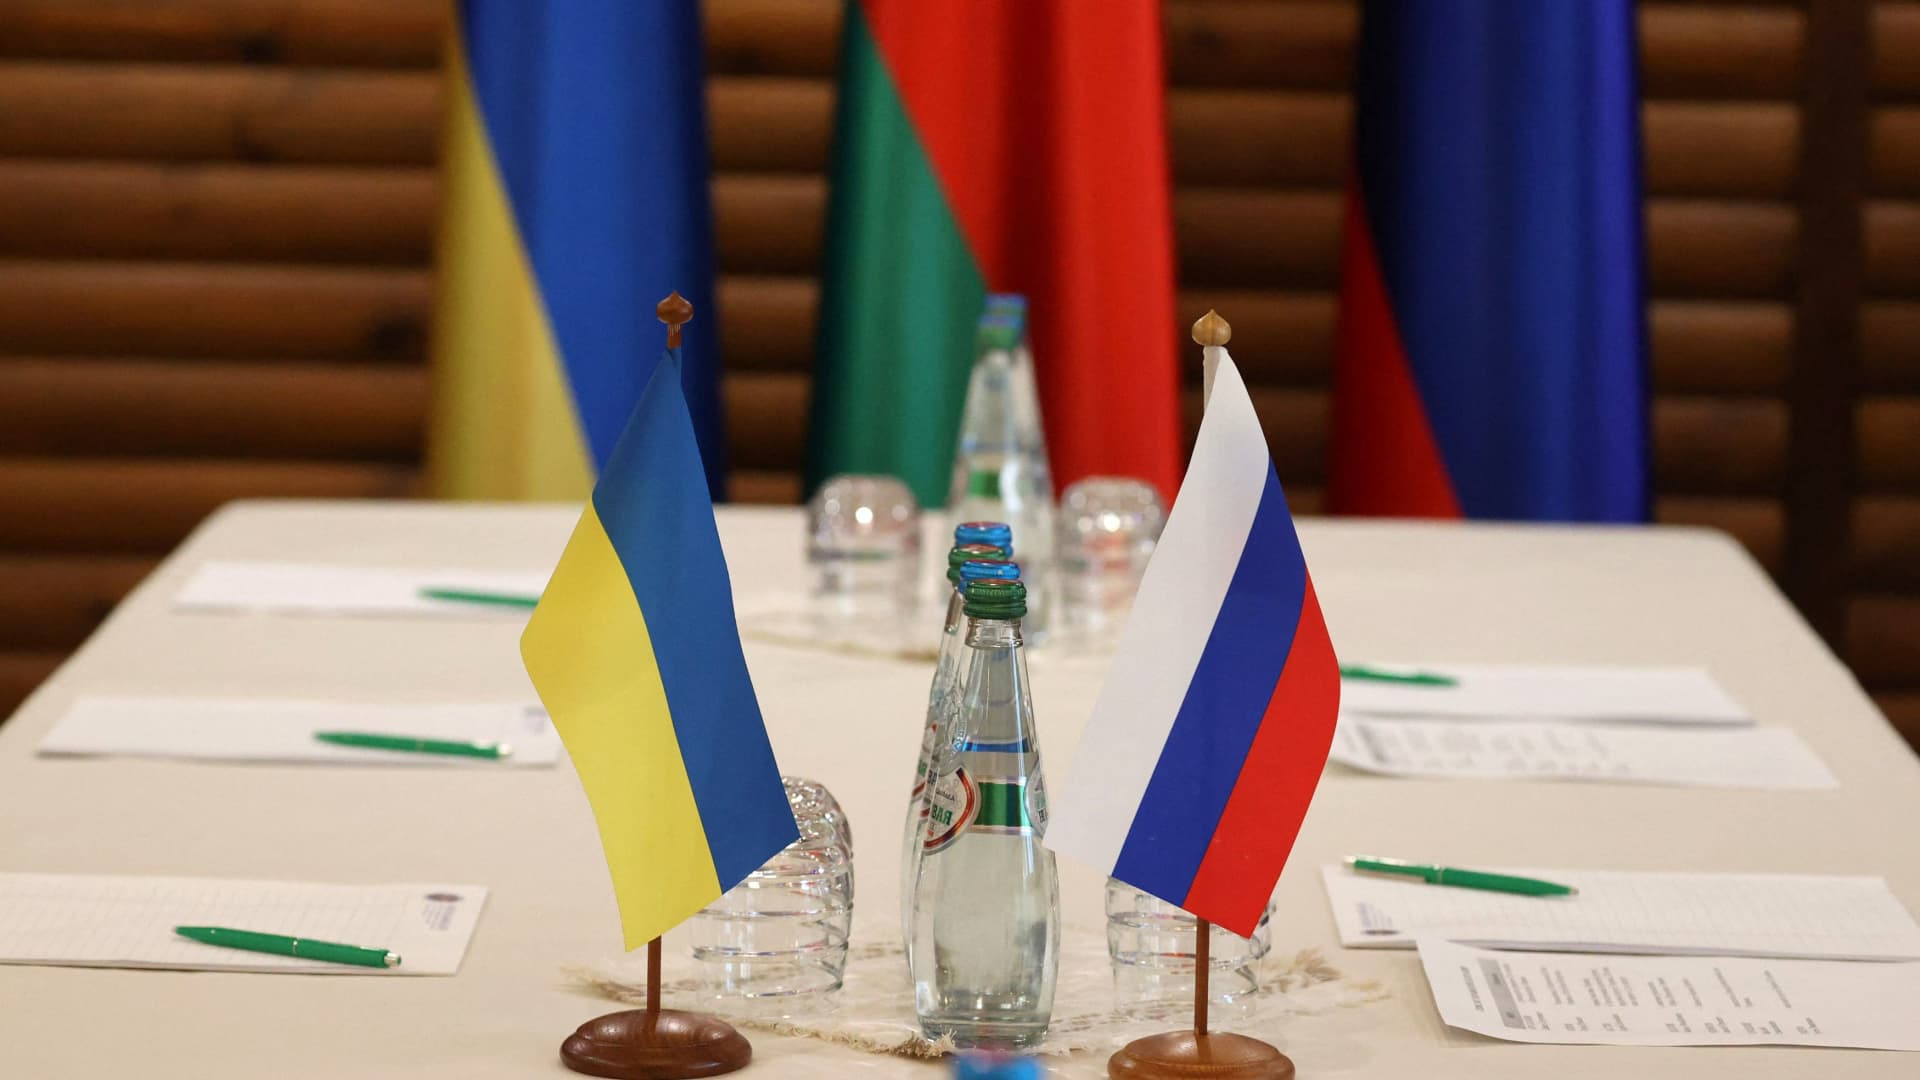 Ukrainian and Russian flags are seen on a table before talks between officials of the two countries in Belarus on March 3, 2022.